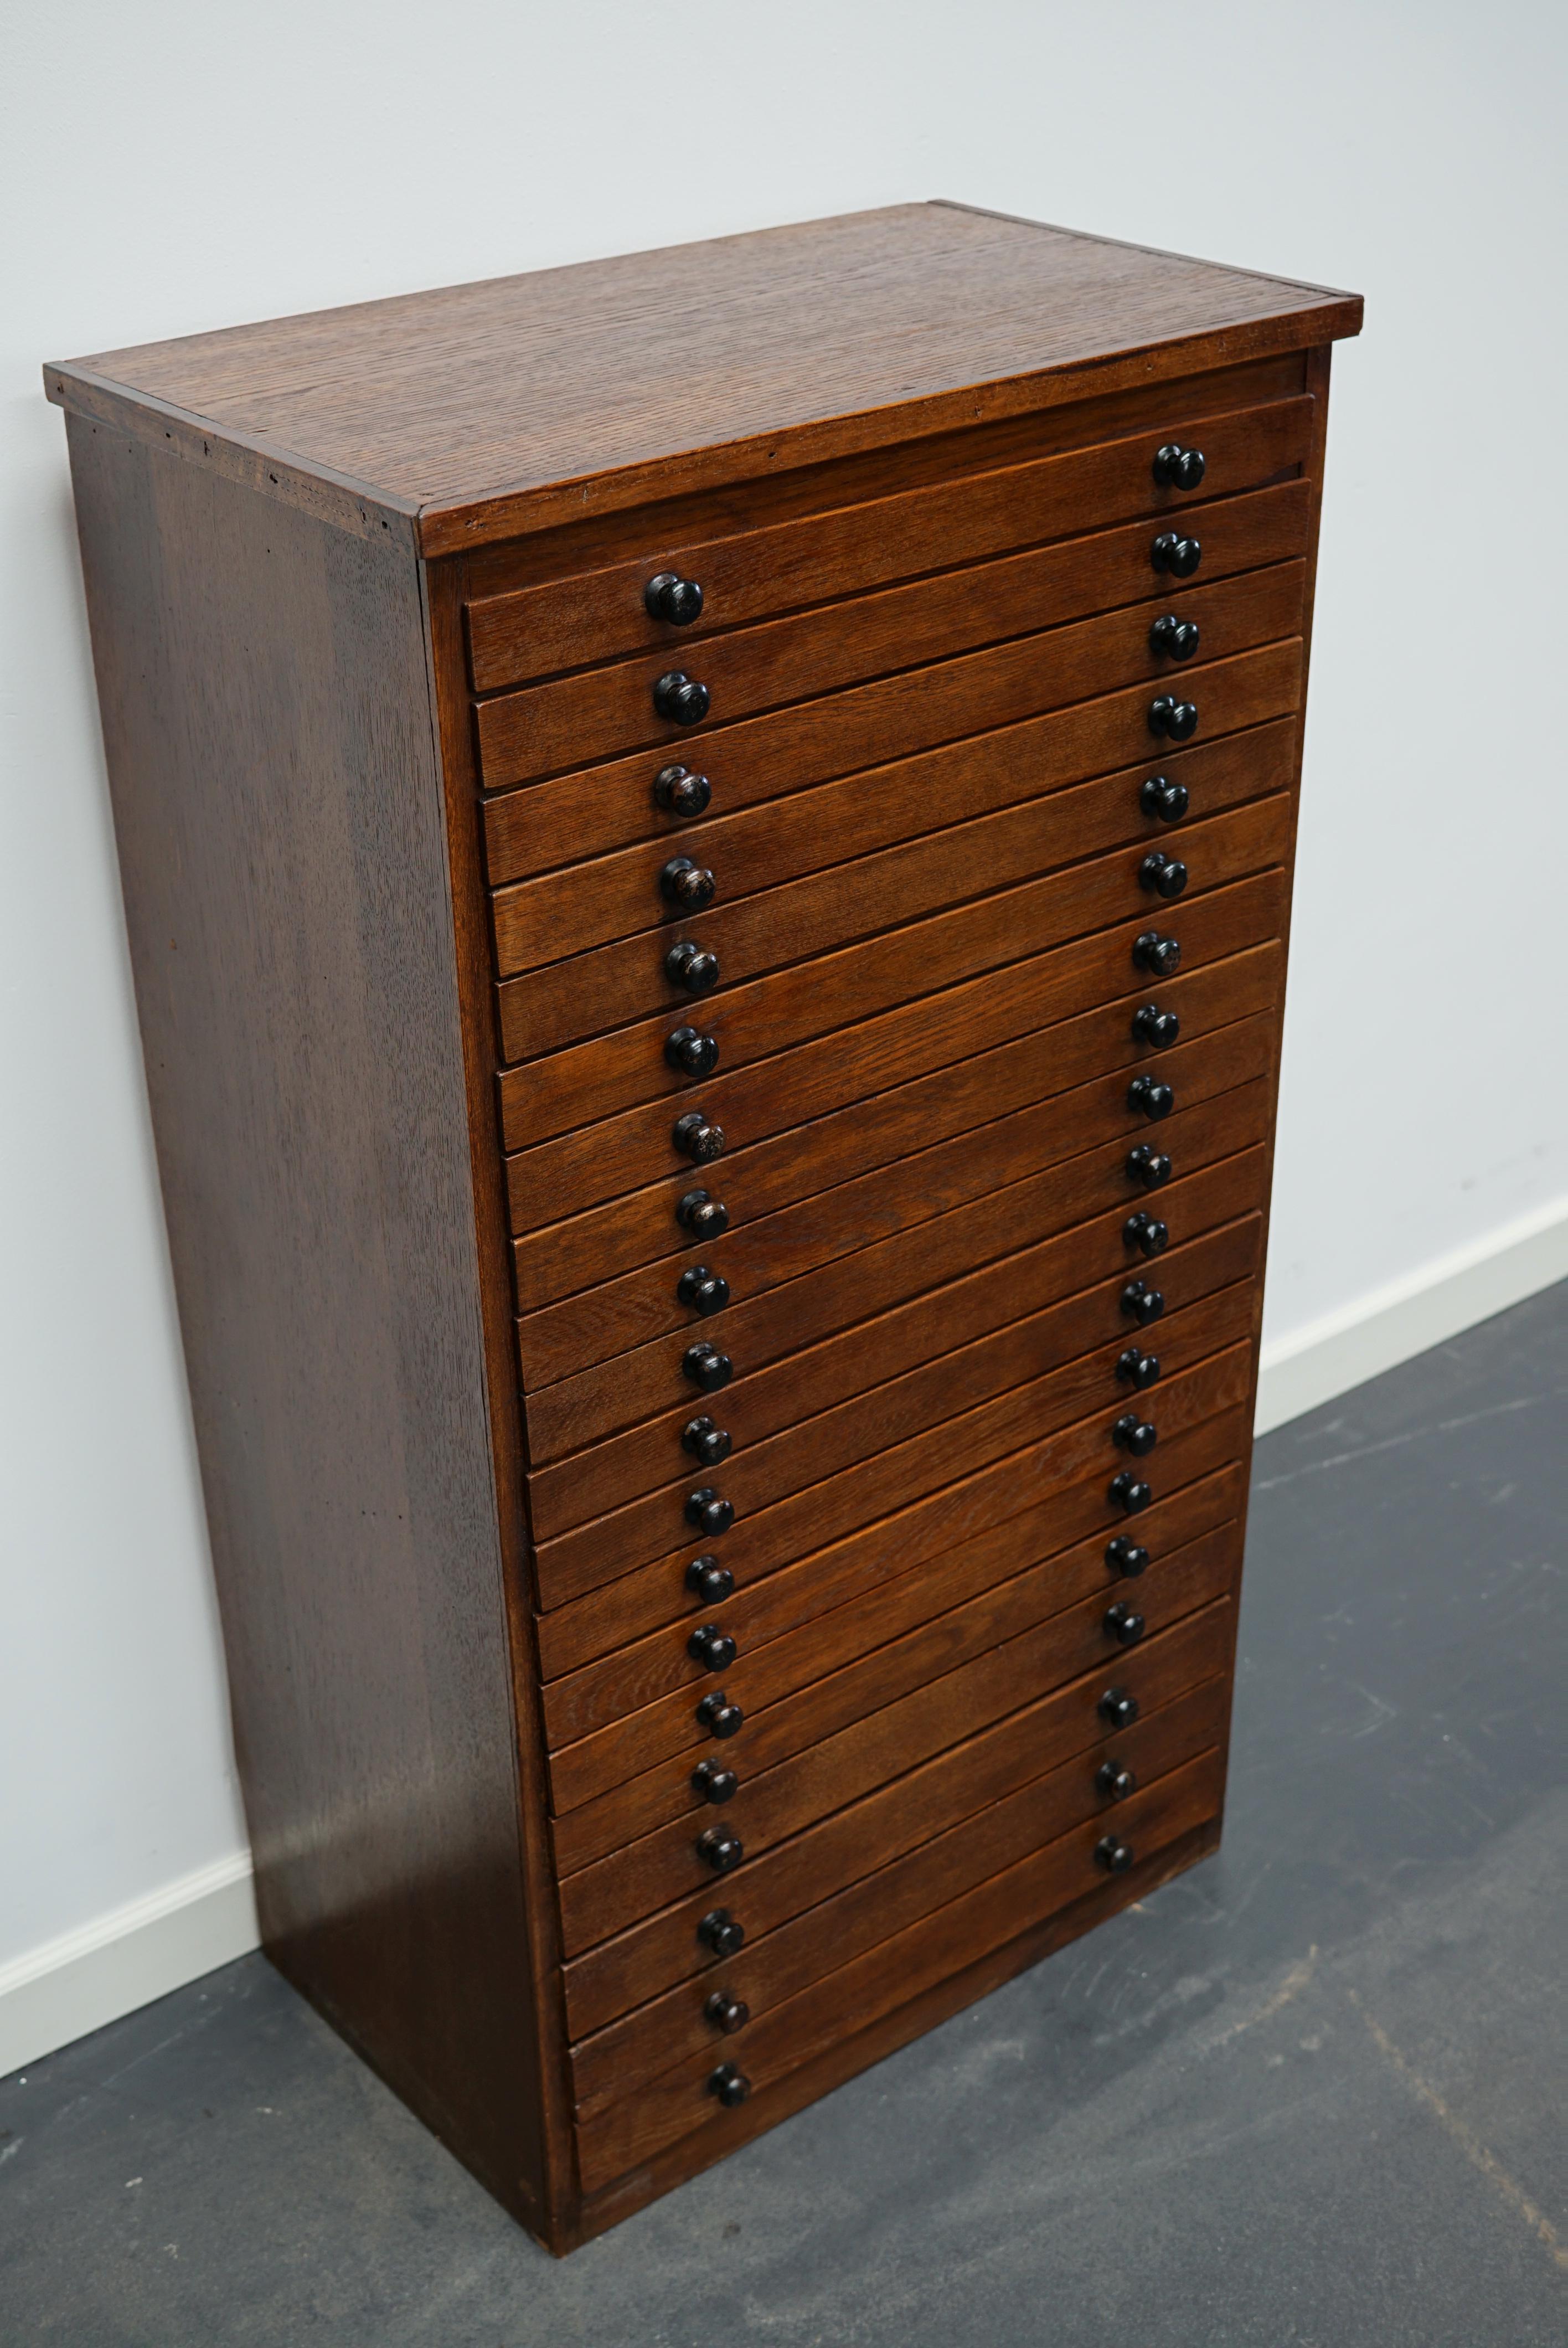 This jewelers / watchmakers cabinet was designed and made circa 1930/1940 in France. It features 20 oak fronted drawers in two different sizes: DWH 28 x 47 x 4 and 2.5 cm. It was used to store watch straps.